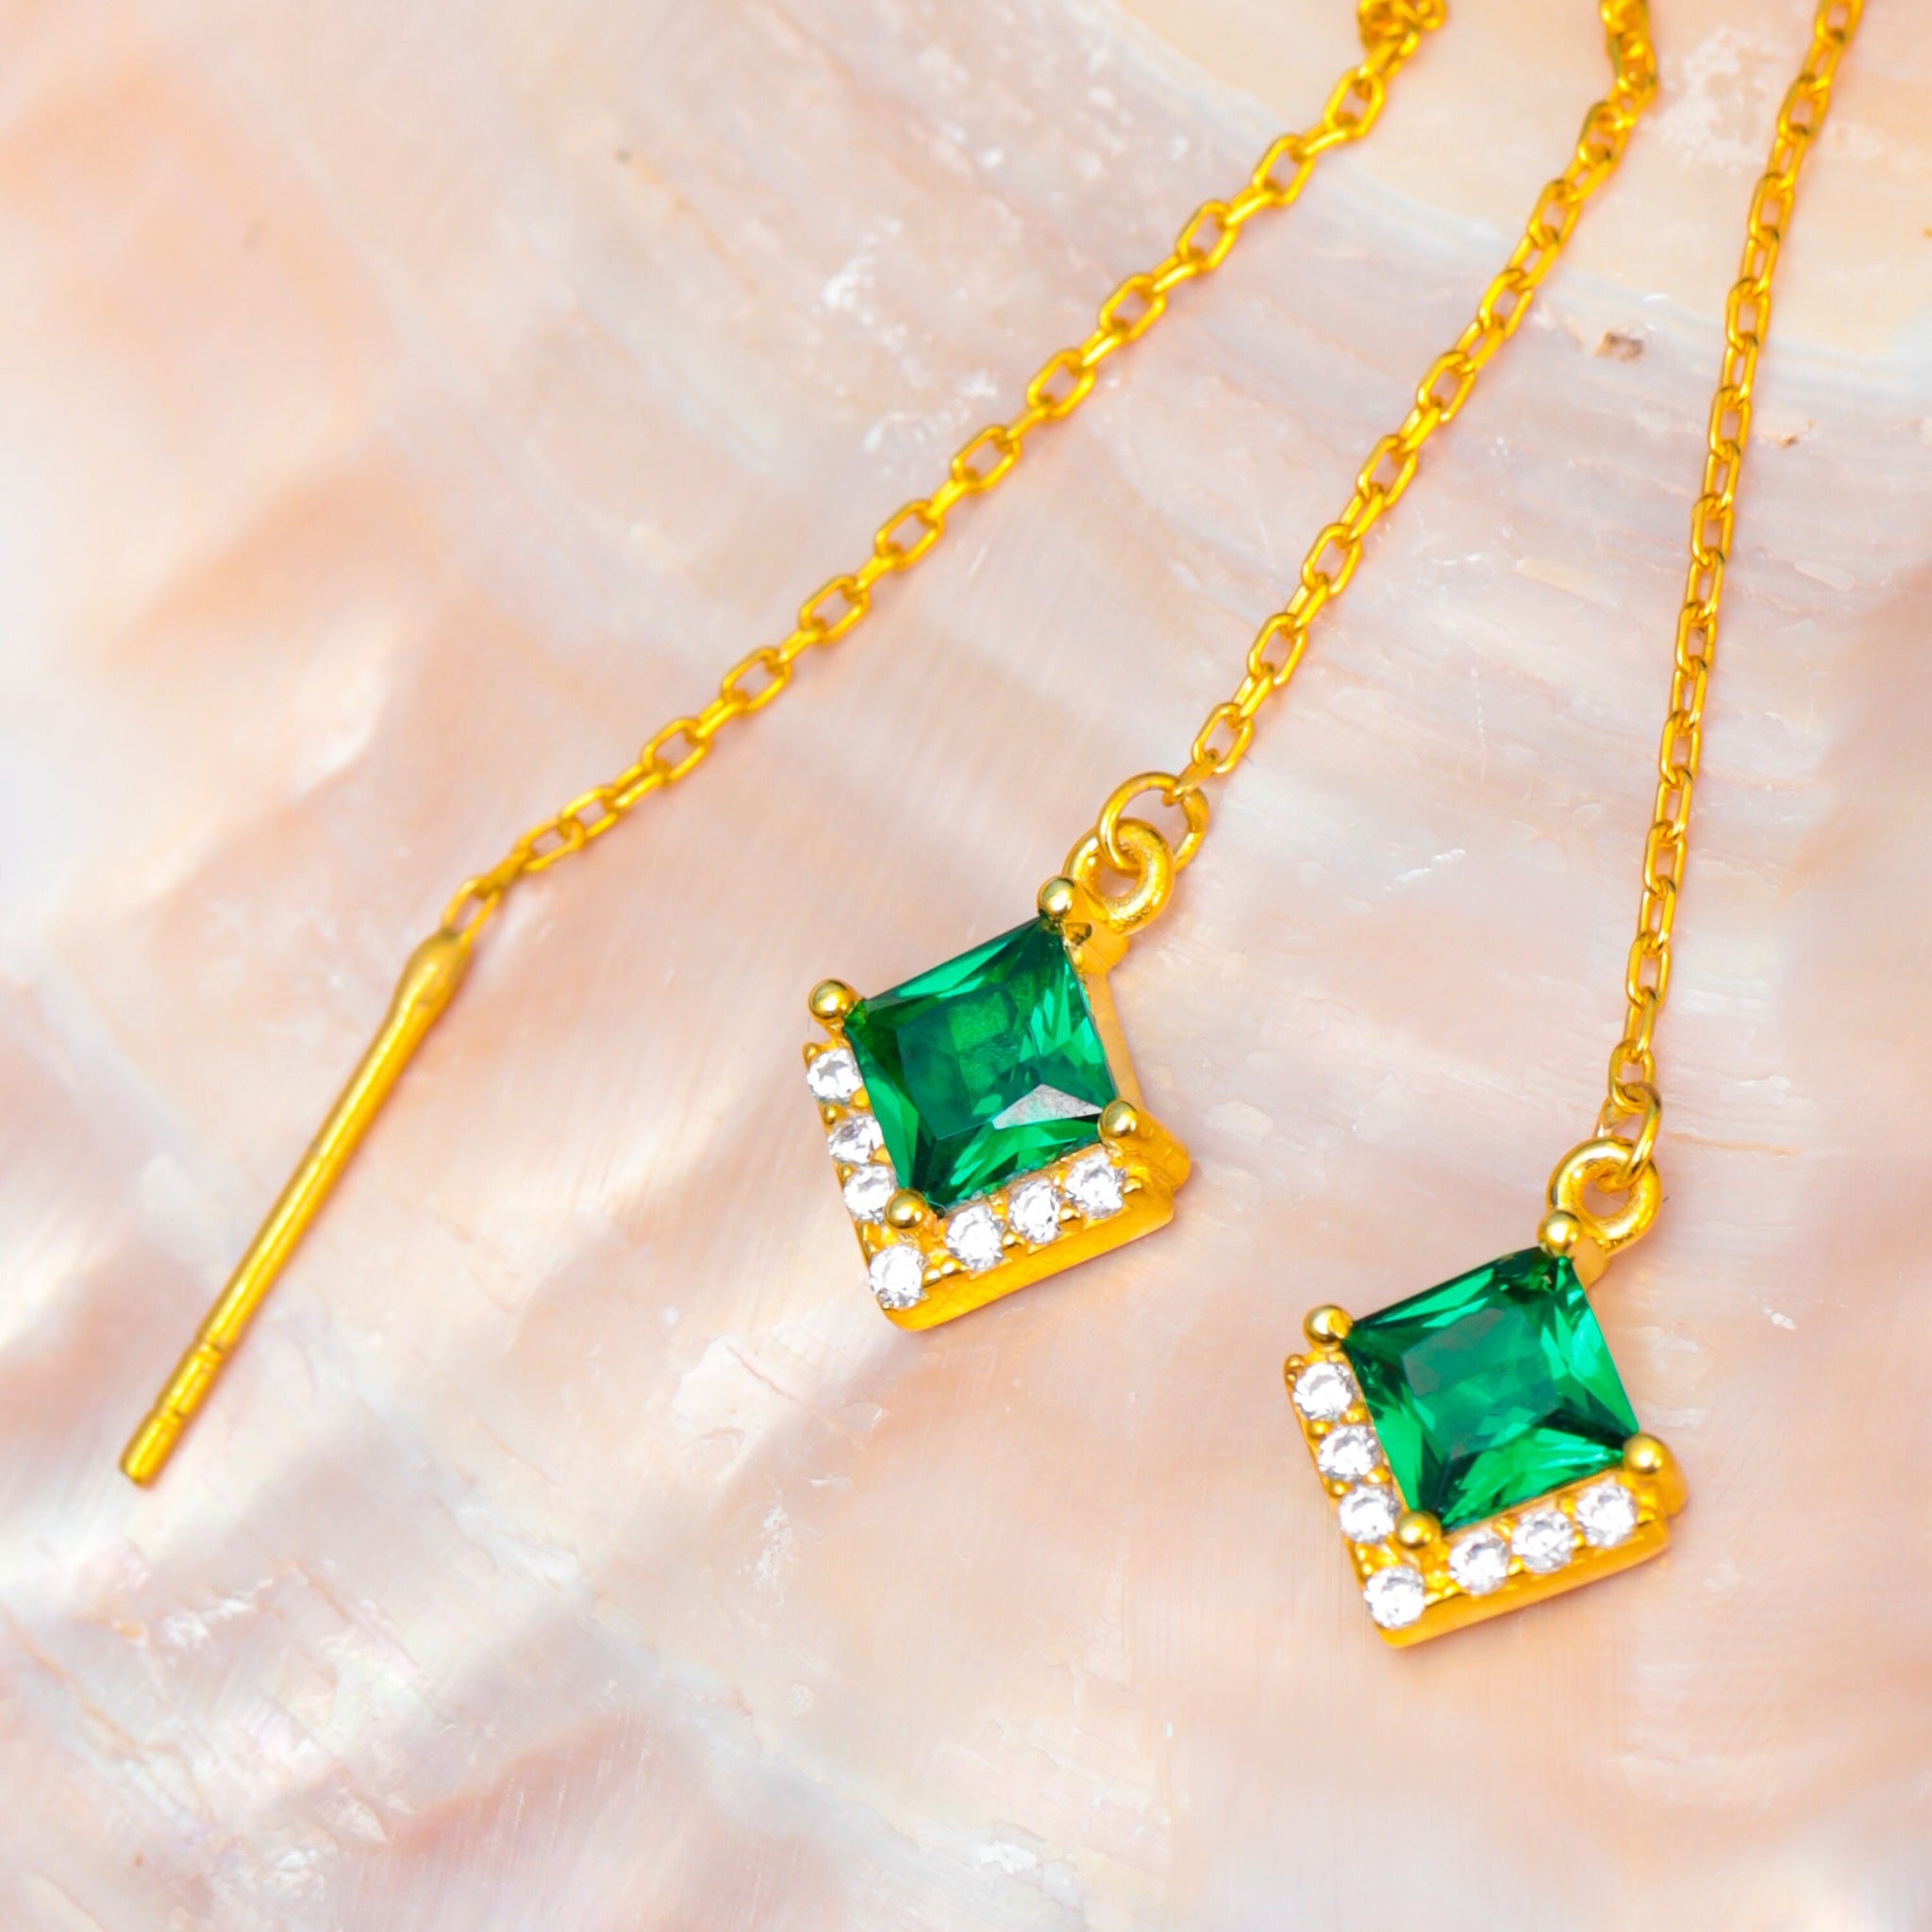 Emerald Green Square Jewelry Set, Emerald Necklace and Earrings Set, Geometric Emerald Jewelry Set, Emerald Green Jewelry, May Birthday Gift